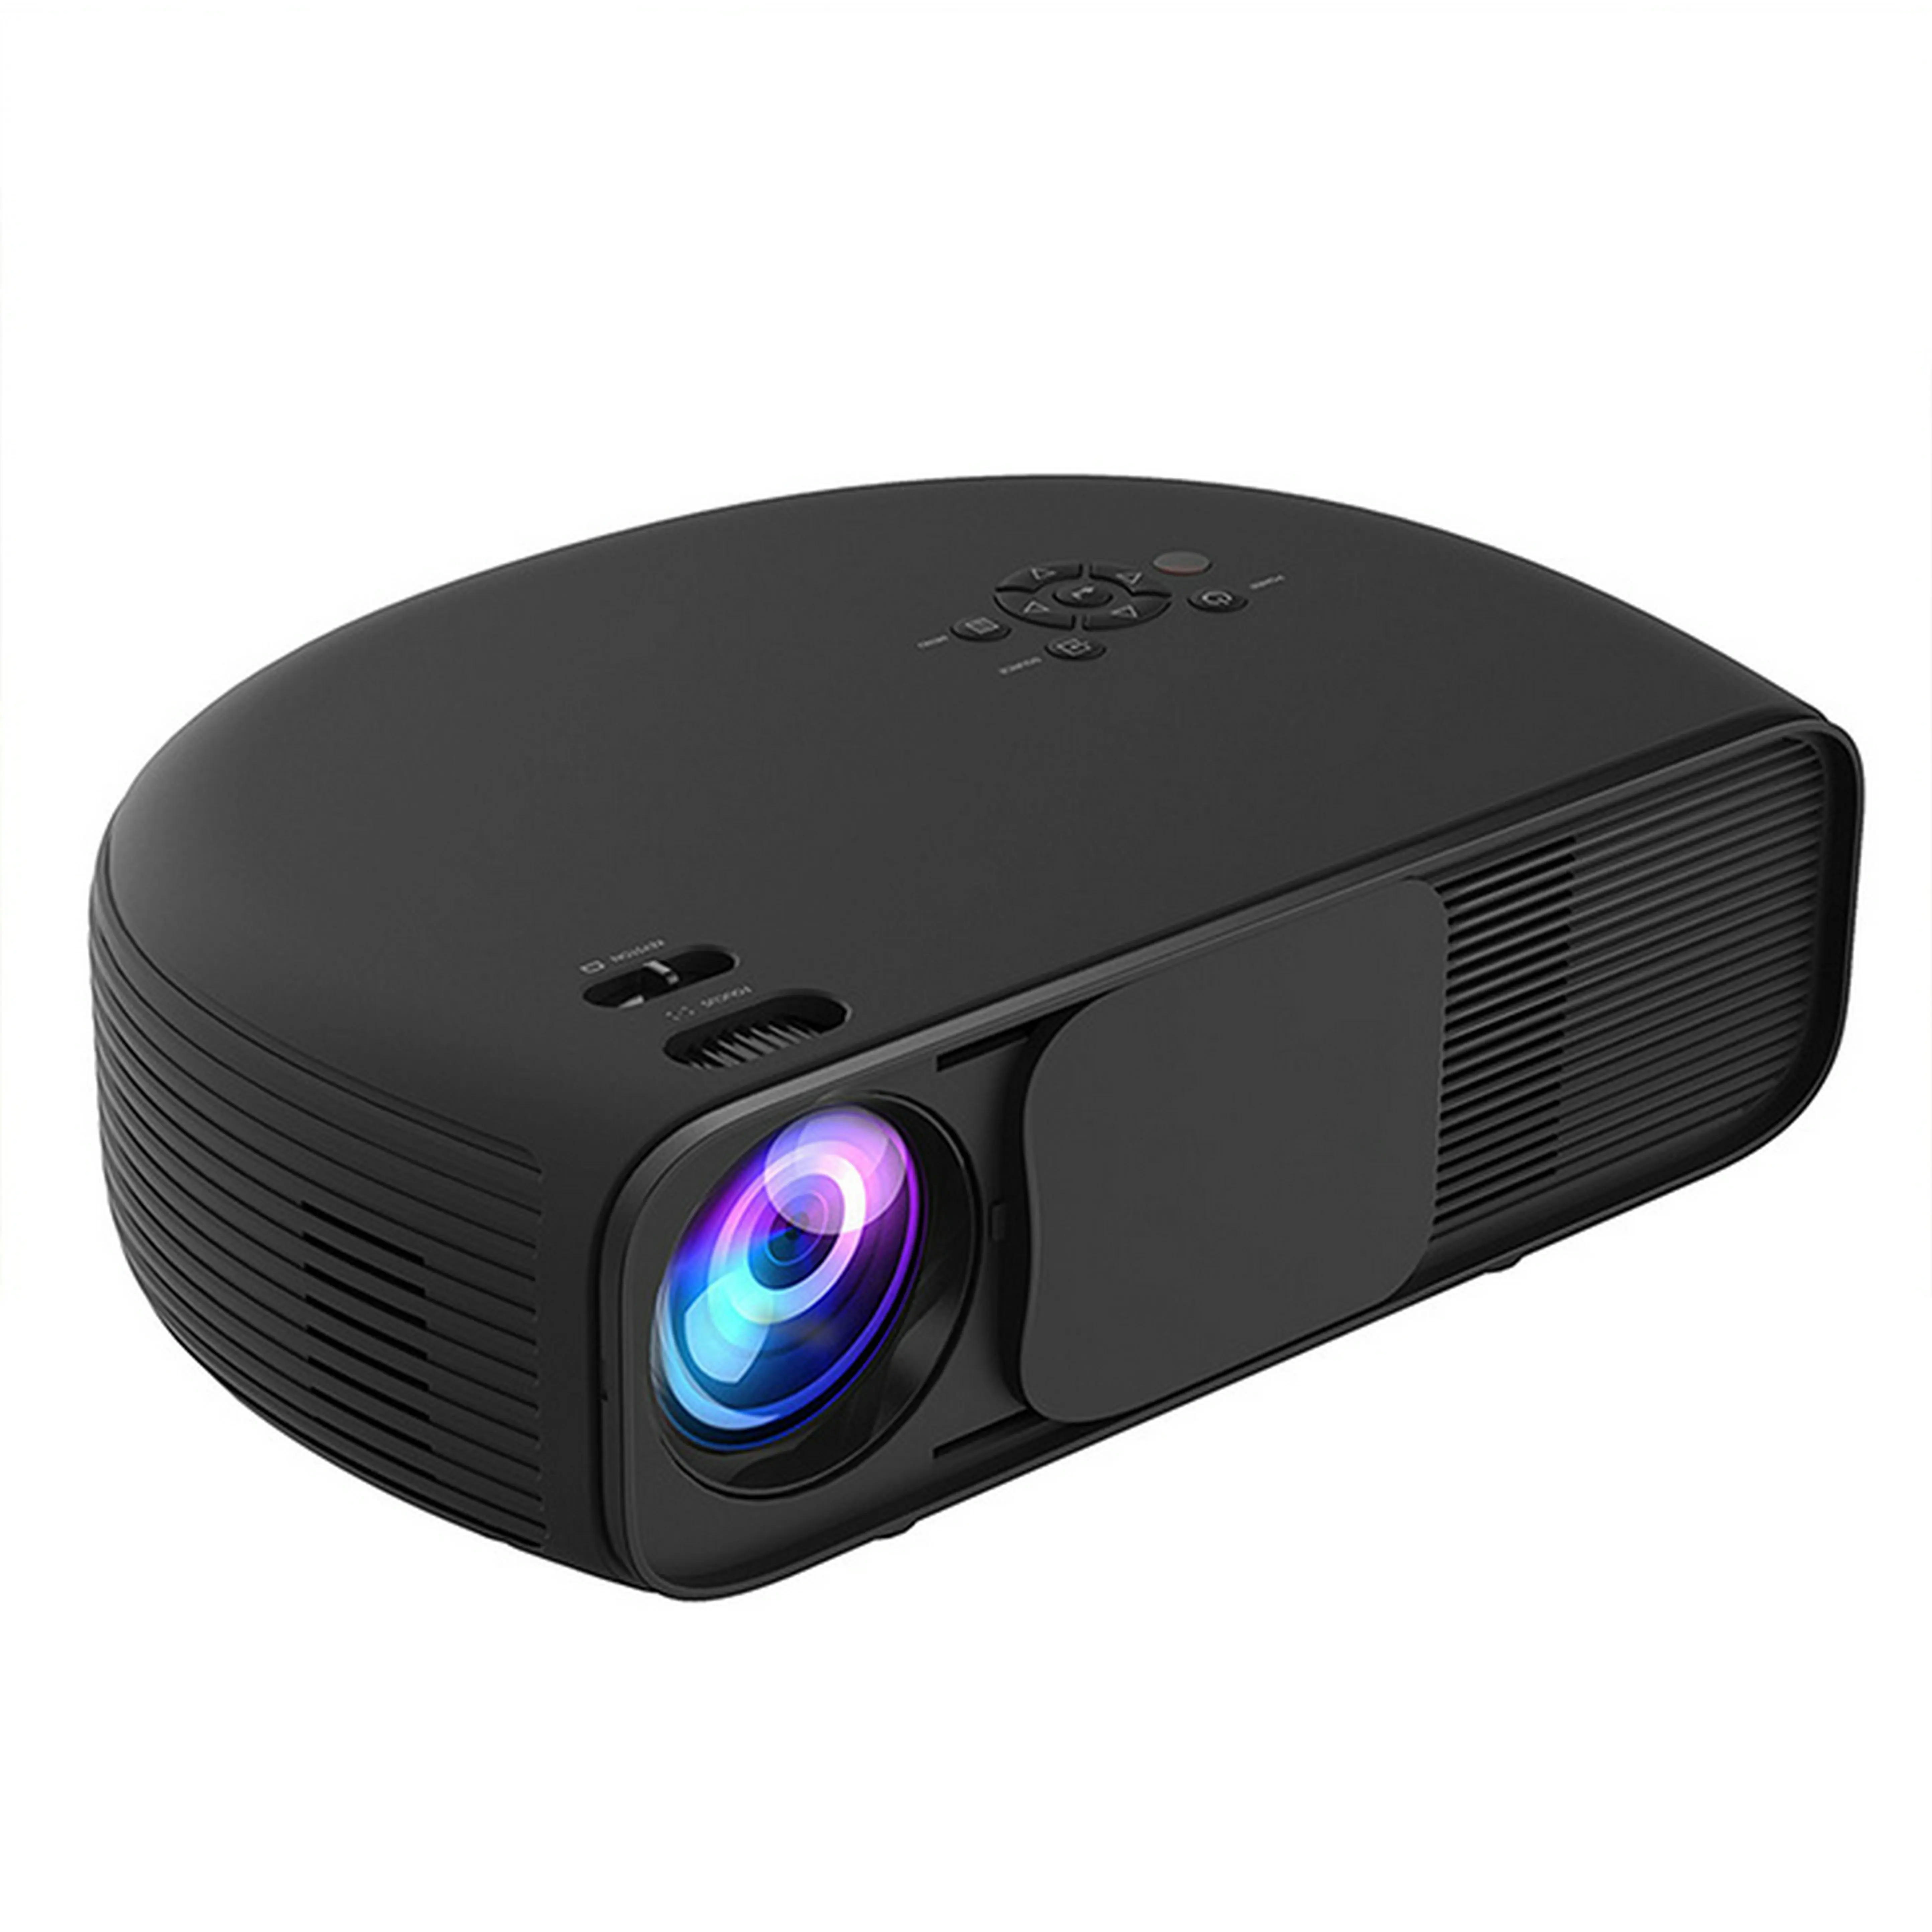 Quality chinese products 50000hours LED  LCD Projector mini with wifi /android / HD / USB / VGA /Headphone ports